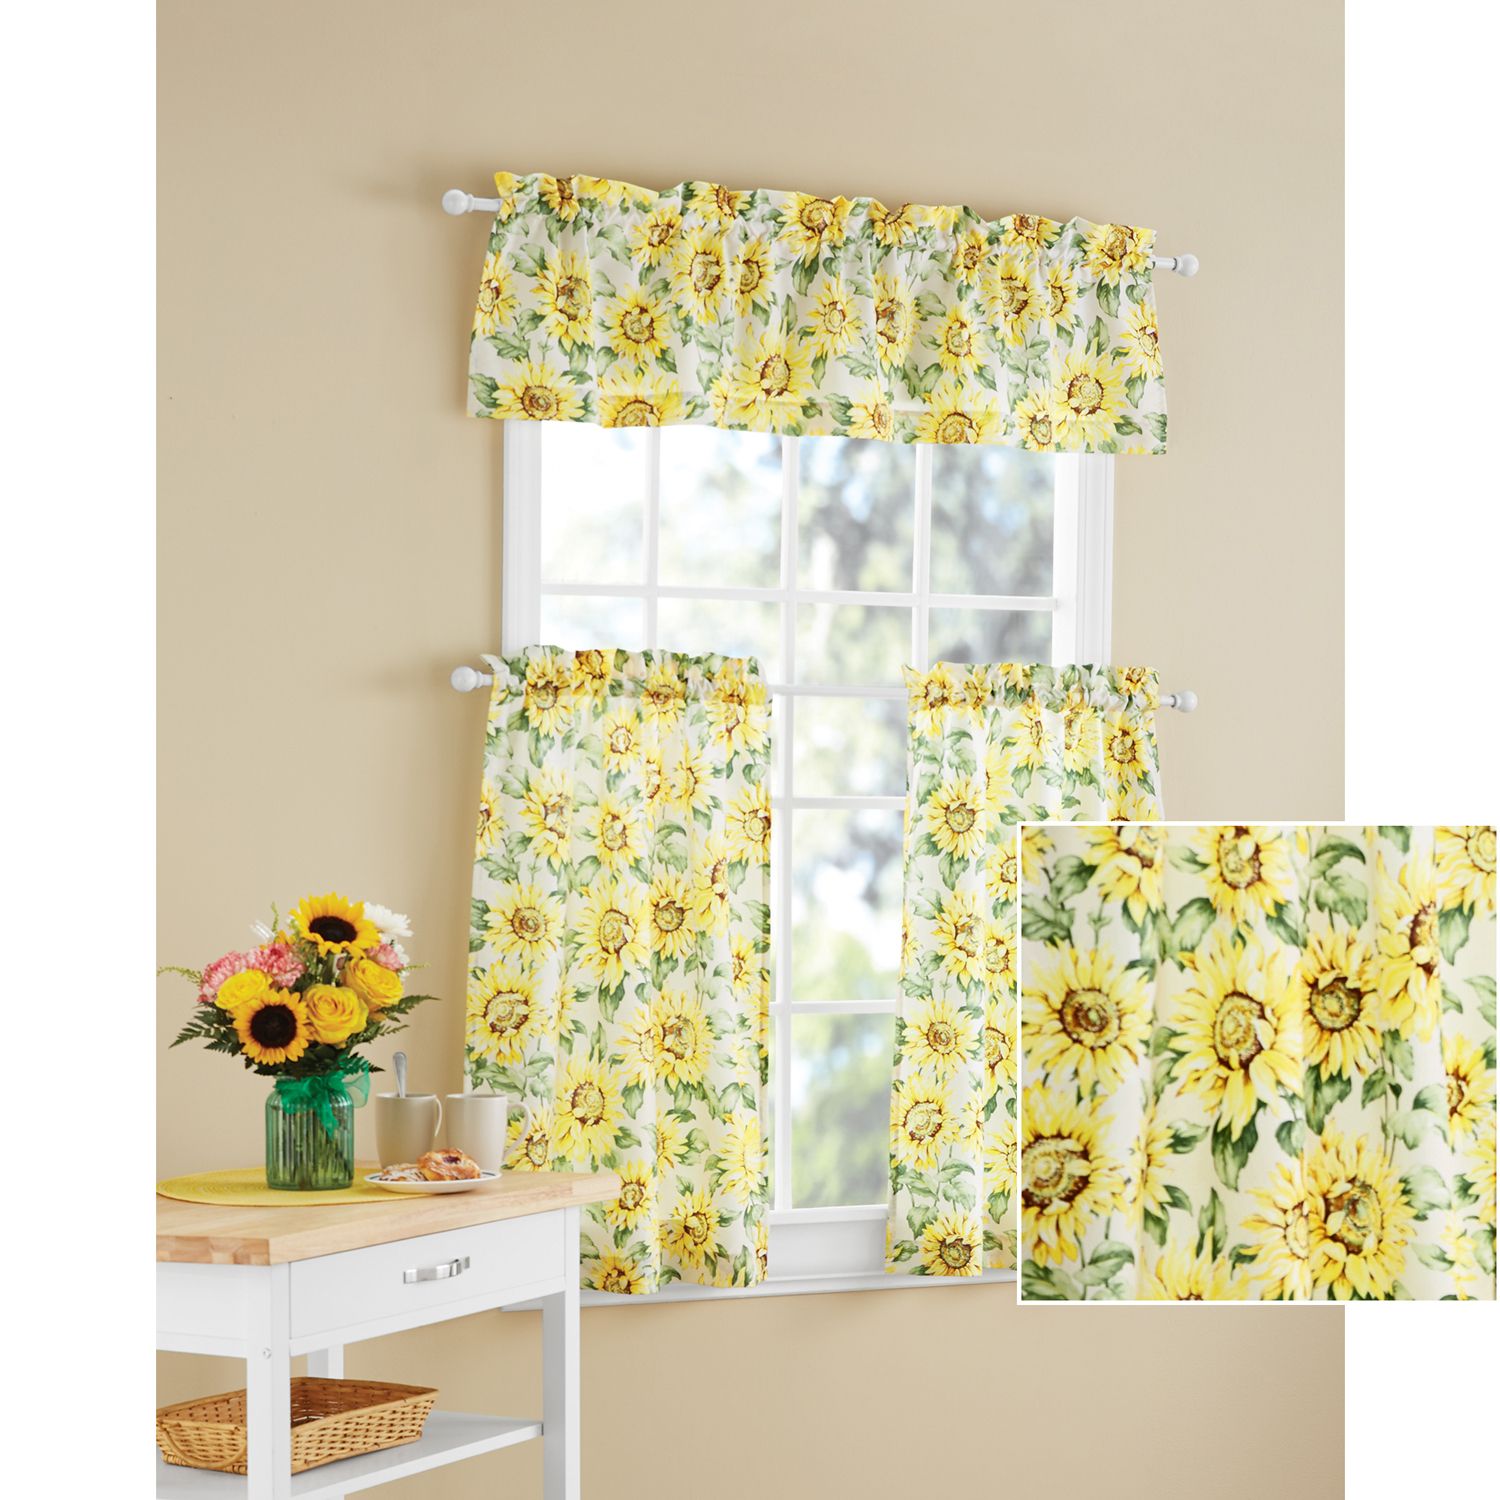 Details About Sunflower 3 Piece Kitchen Curtain Tier And Valance Set Home Decor Room Window For Sunflower Cottage Kitchen Curtain Tier And Valance Sets 